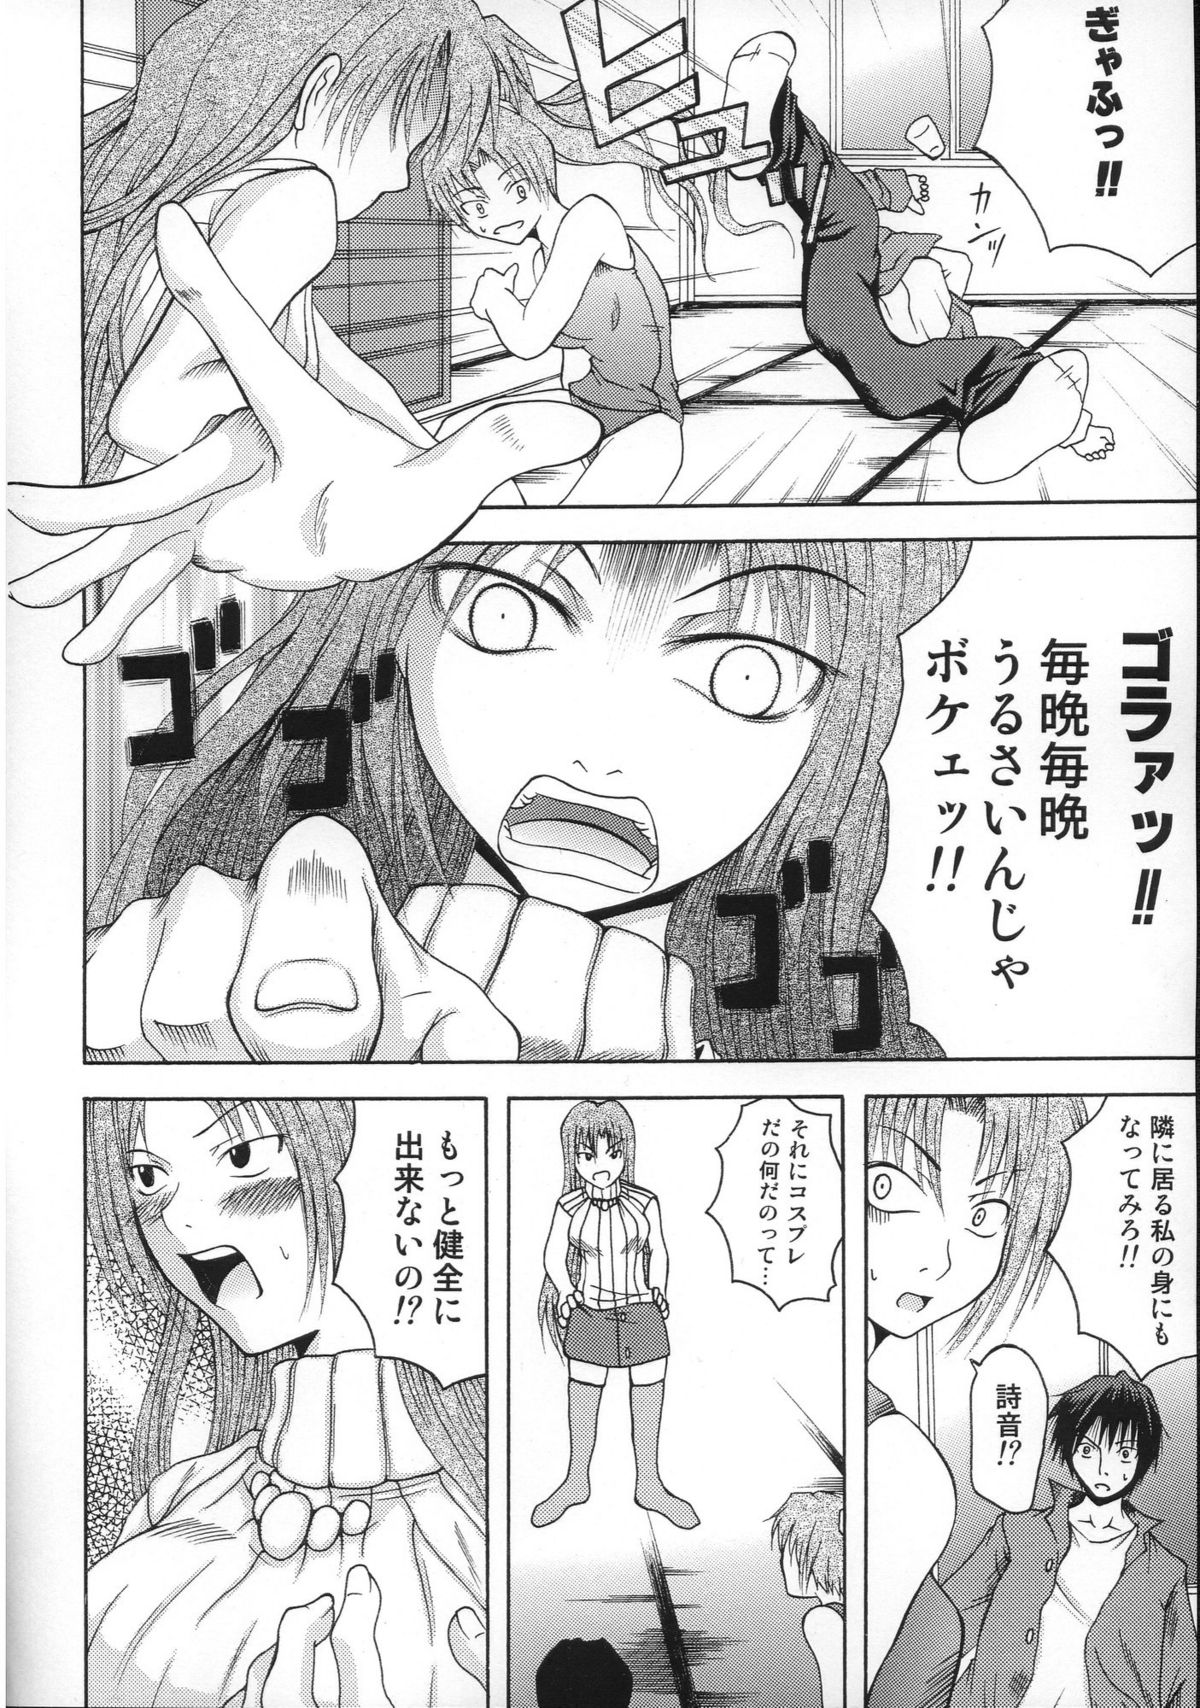 [In-Somnia (アキバカヅキ , 工藤洋)] 出火原因はお前だぜ!! | ...you the cause of breaking out... (ひぐらしのなく頃に)